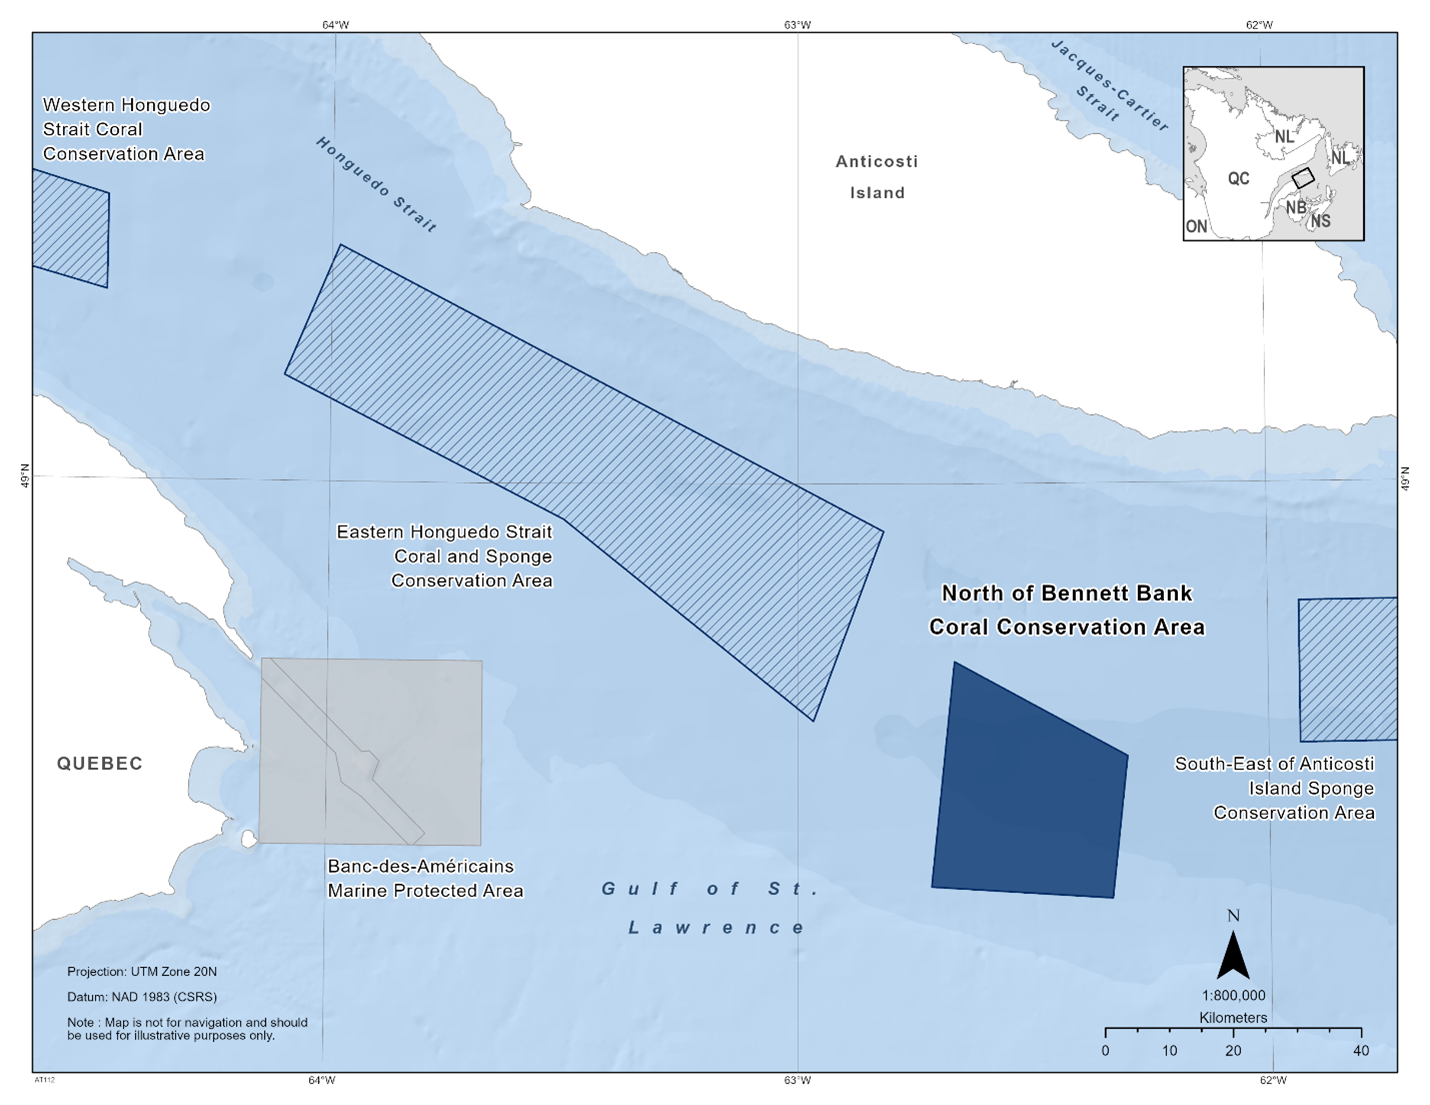 Map of the North of Bennett Bank Coral Conservation Area depicted in dark blue. The map also features the marine refuges nearby with dark blue diagonal lines (Western Honguedo Strait Coral Conservation Area, Eastern Honguedo Strait Coral and Sponge Conservation Area, South-East of Anticosti Island Sponge Conservation Area).